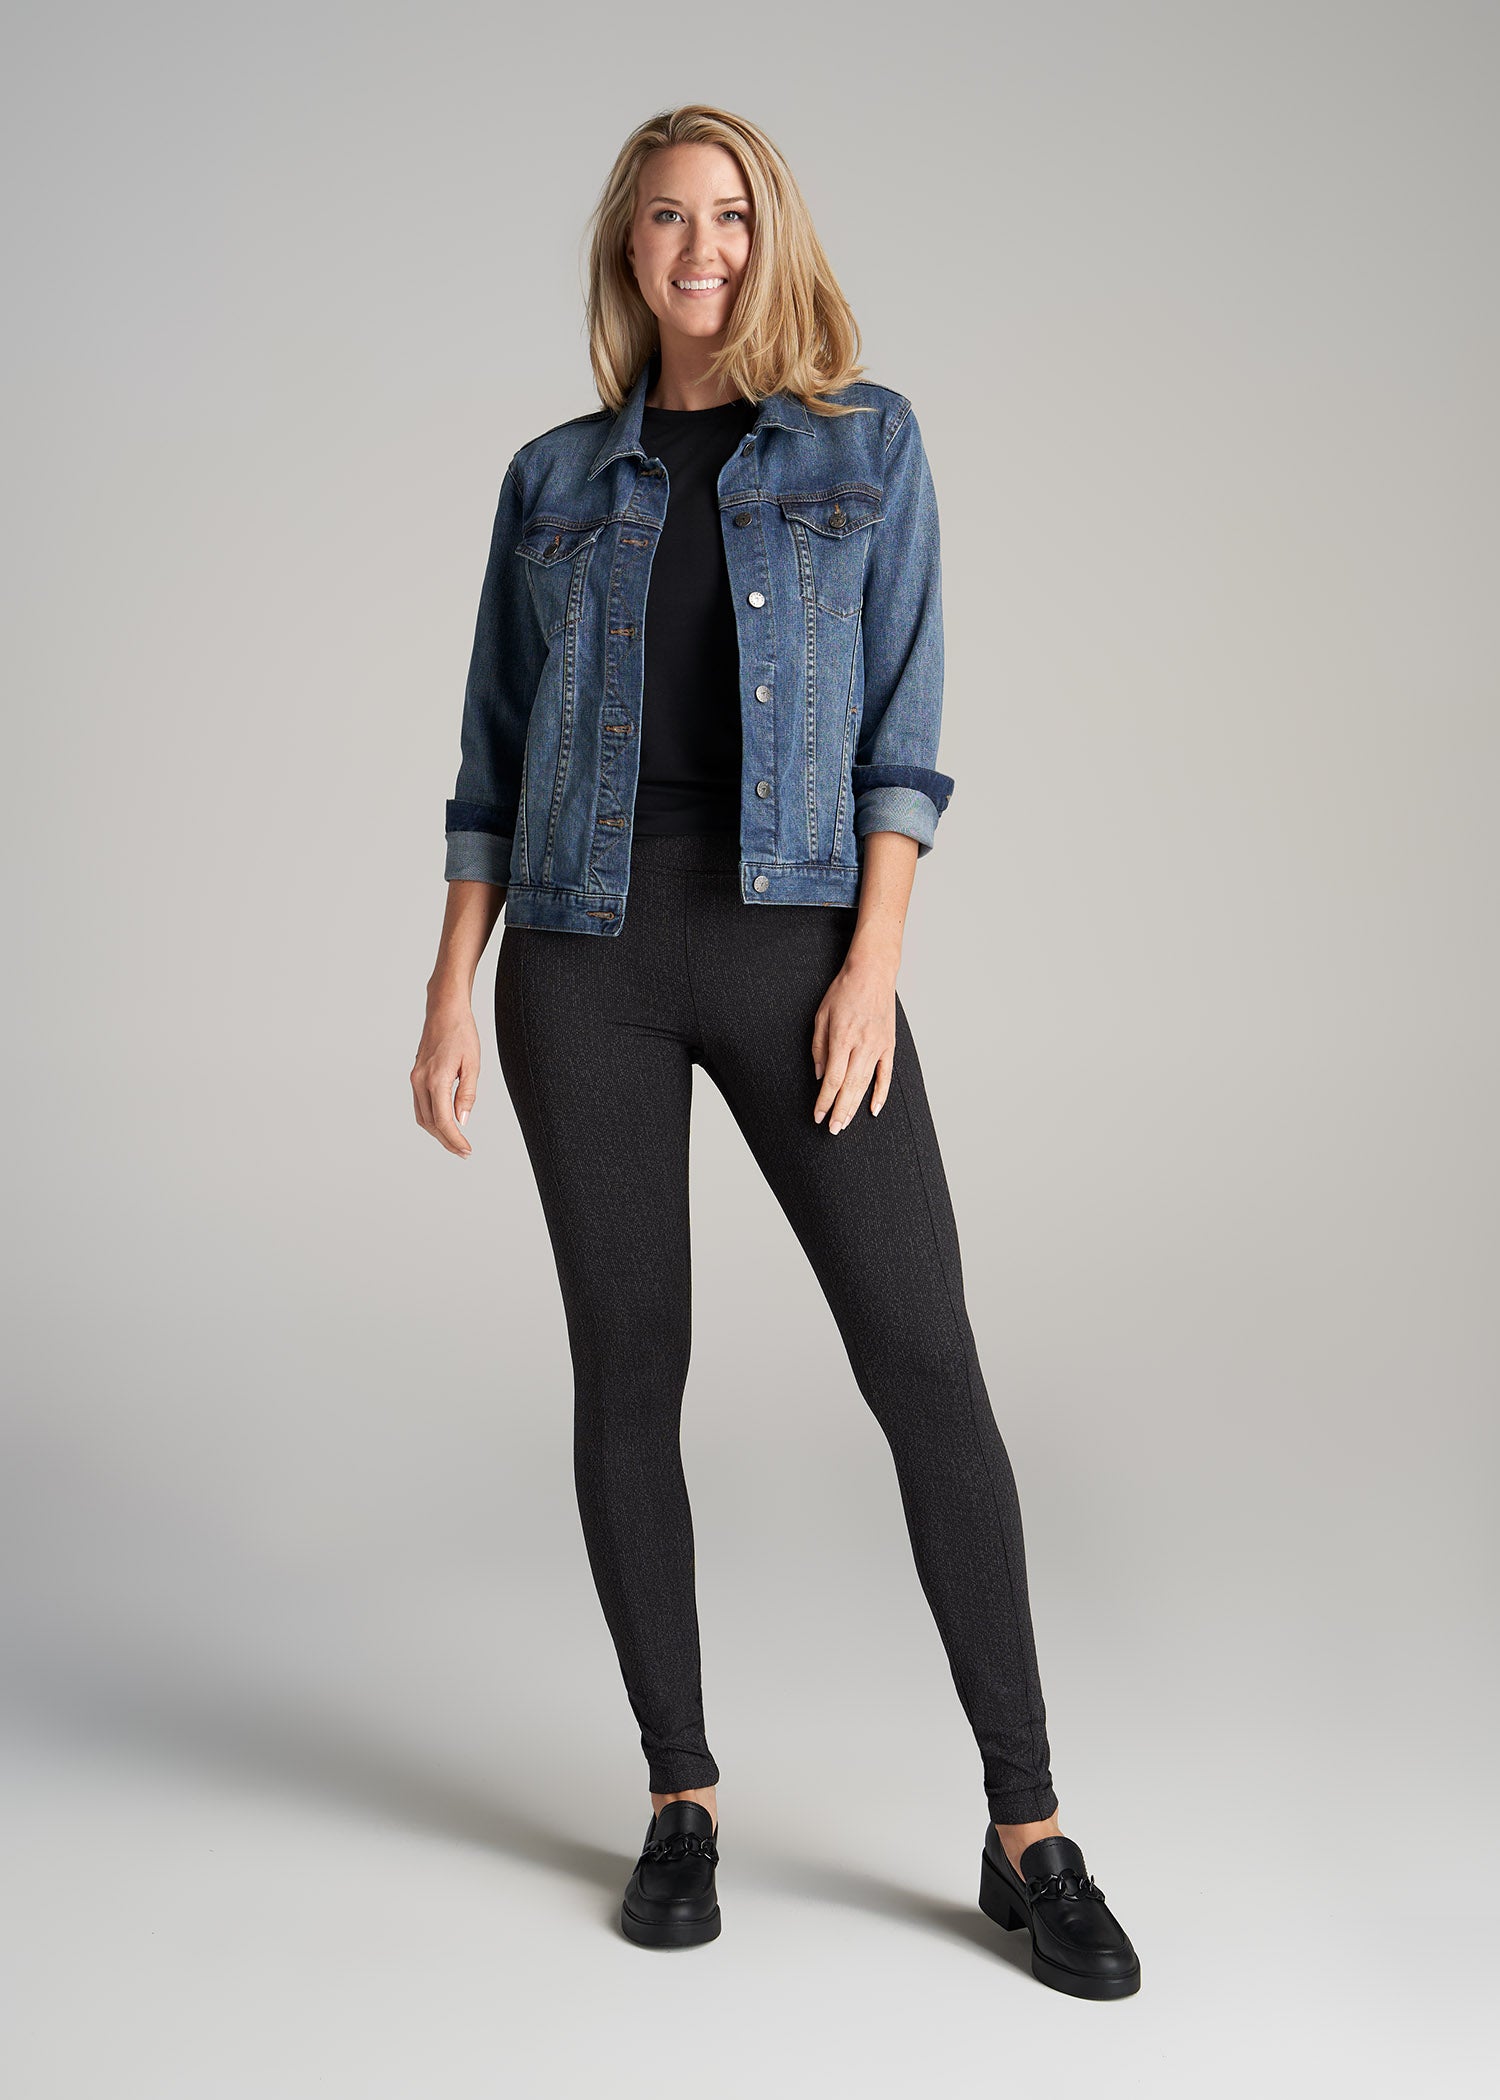 Tall Women's Legging With Pockets Navy, Bella Outer-Pocket